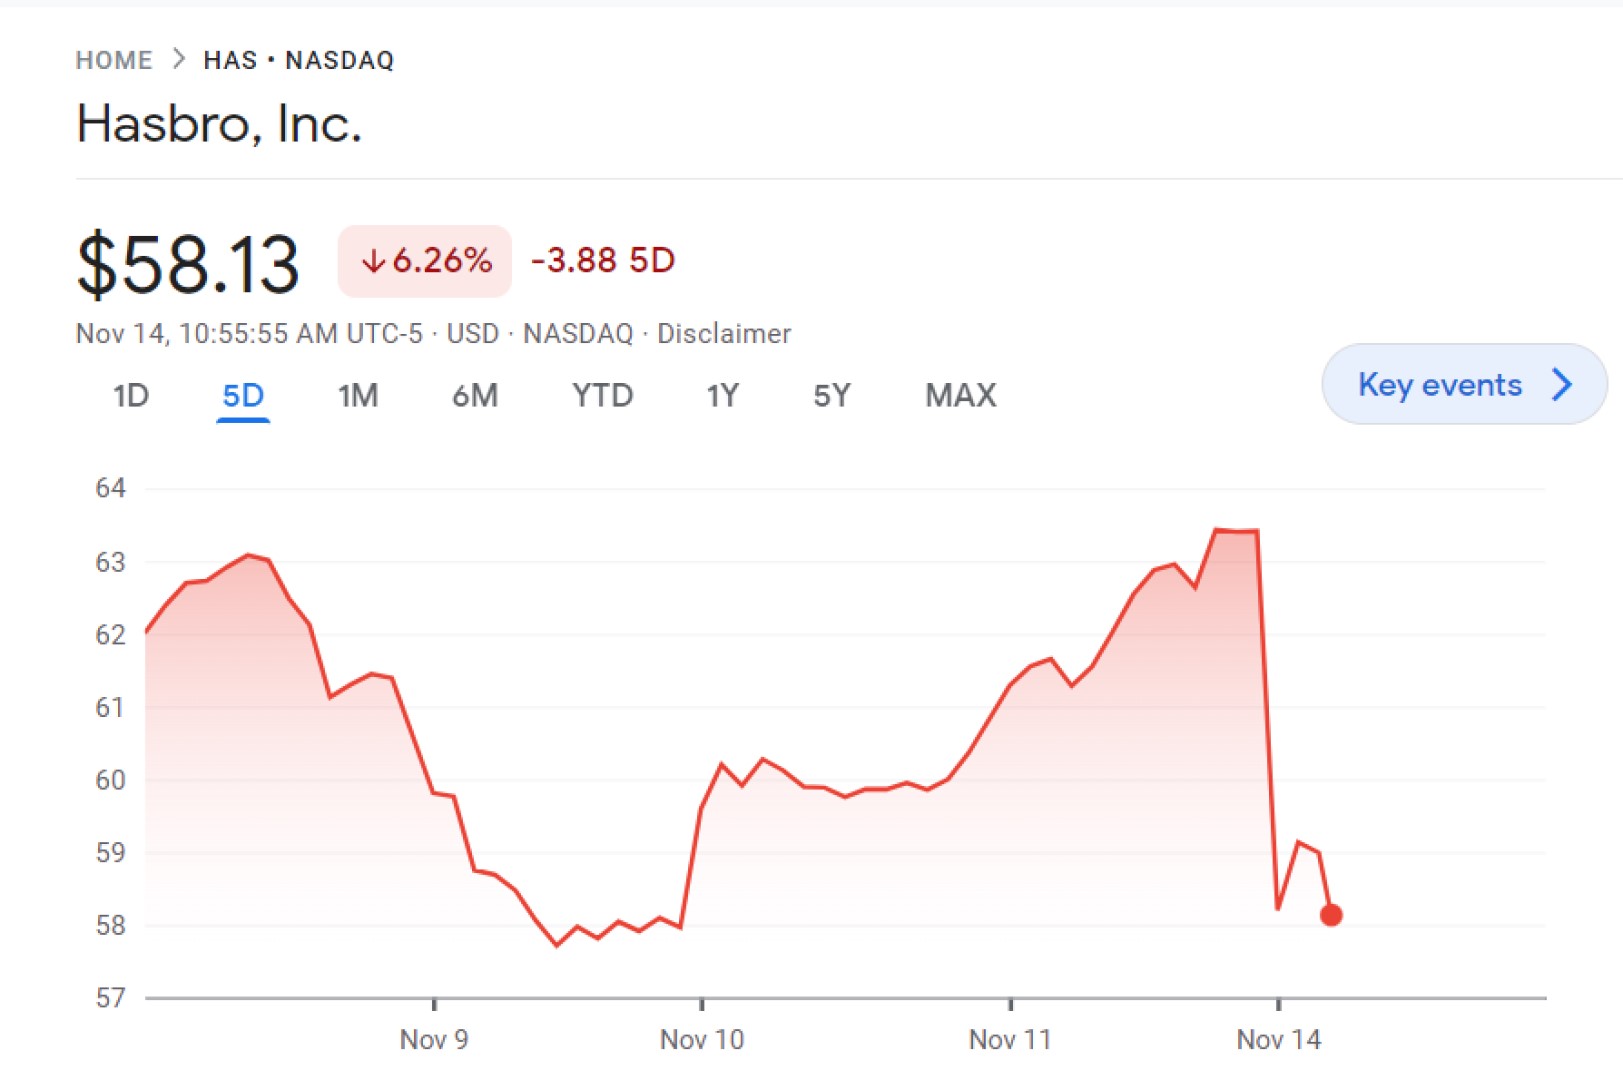 MTG overproducing destroying Hasbro value - 5-day graph of Hasbro's share price from Google Finance